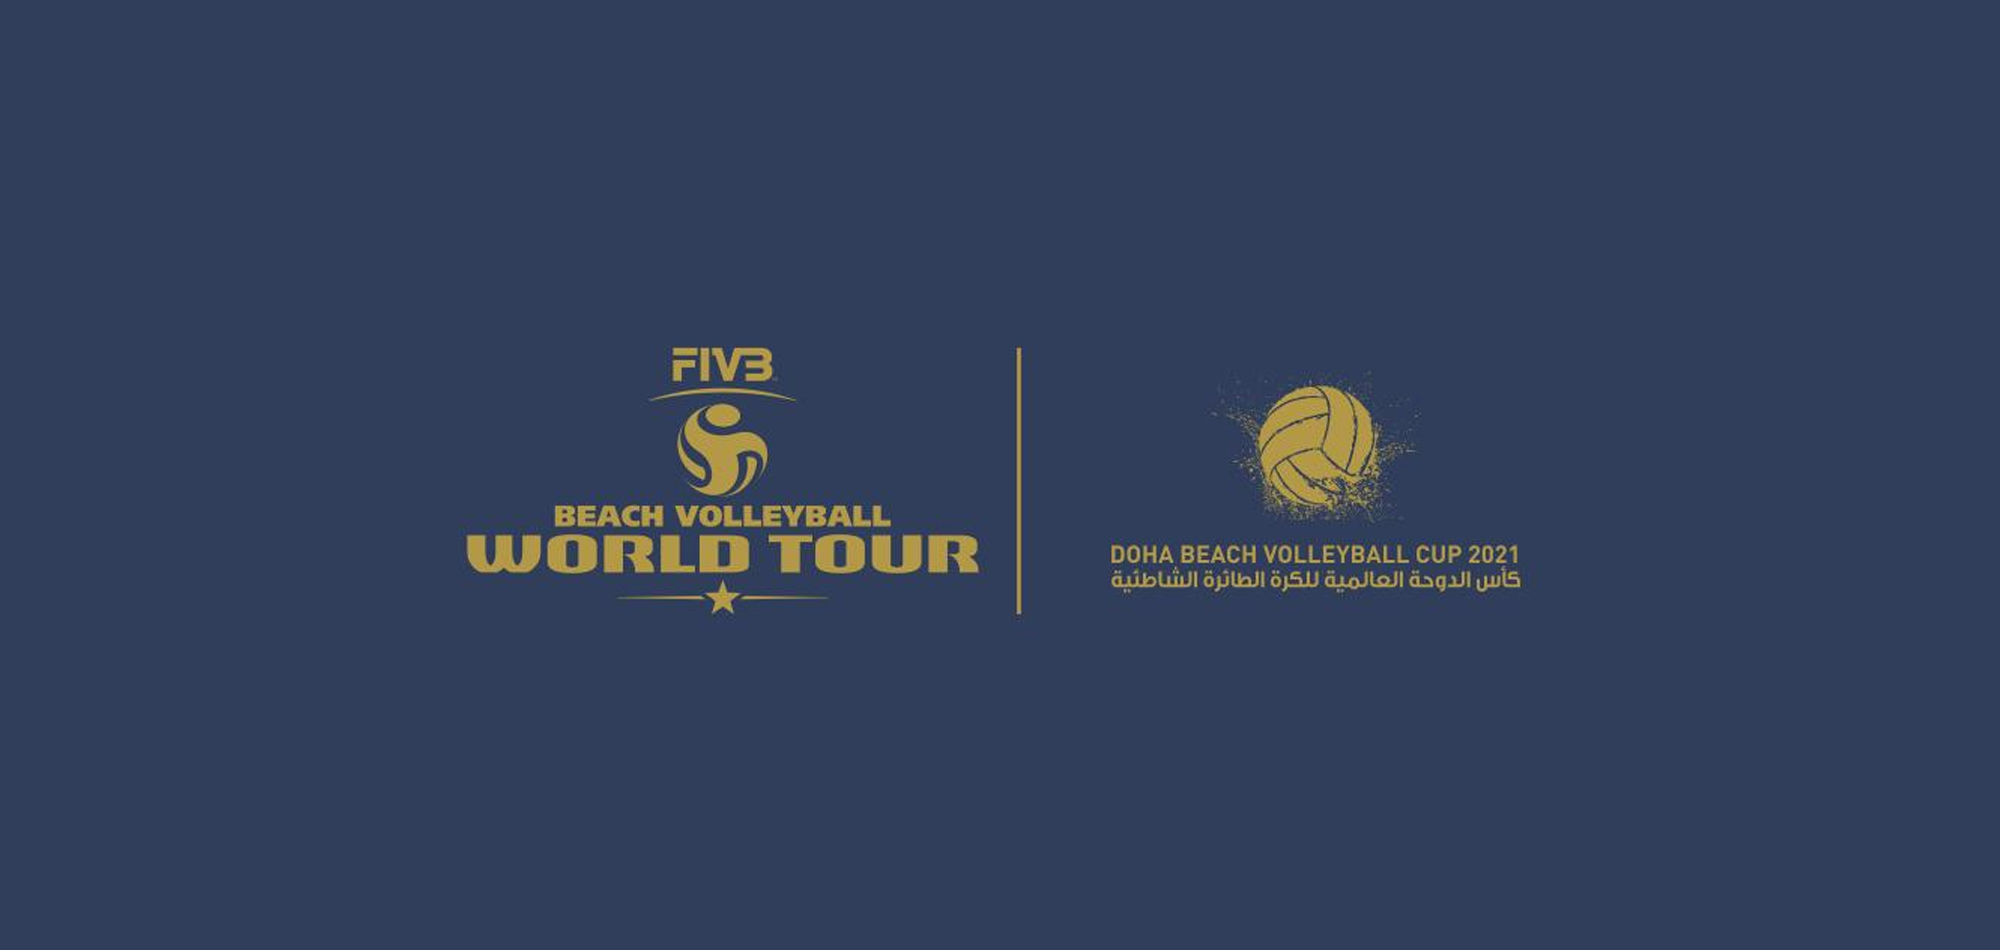 Doha Beach Volleyball Cup 2021, on the starting line